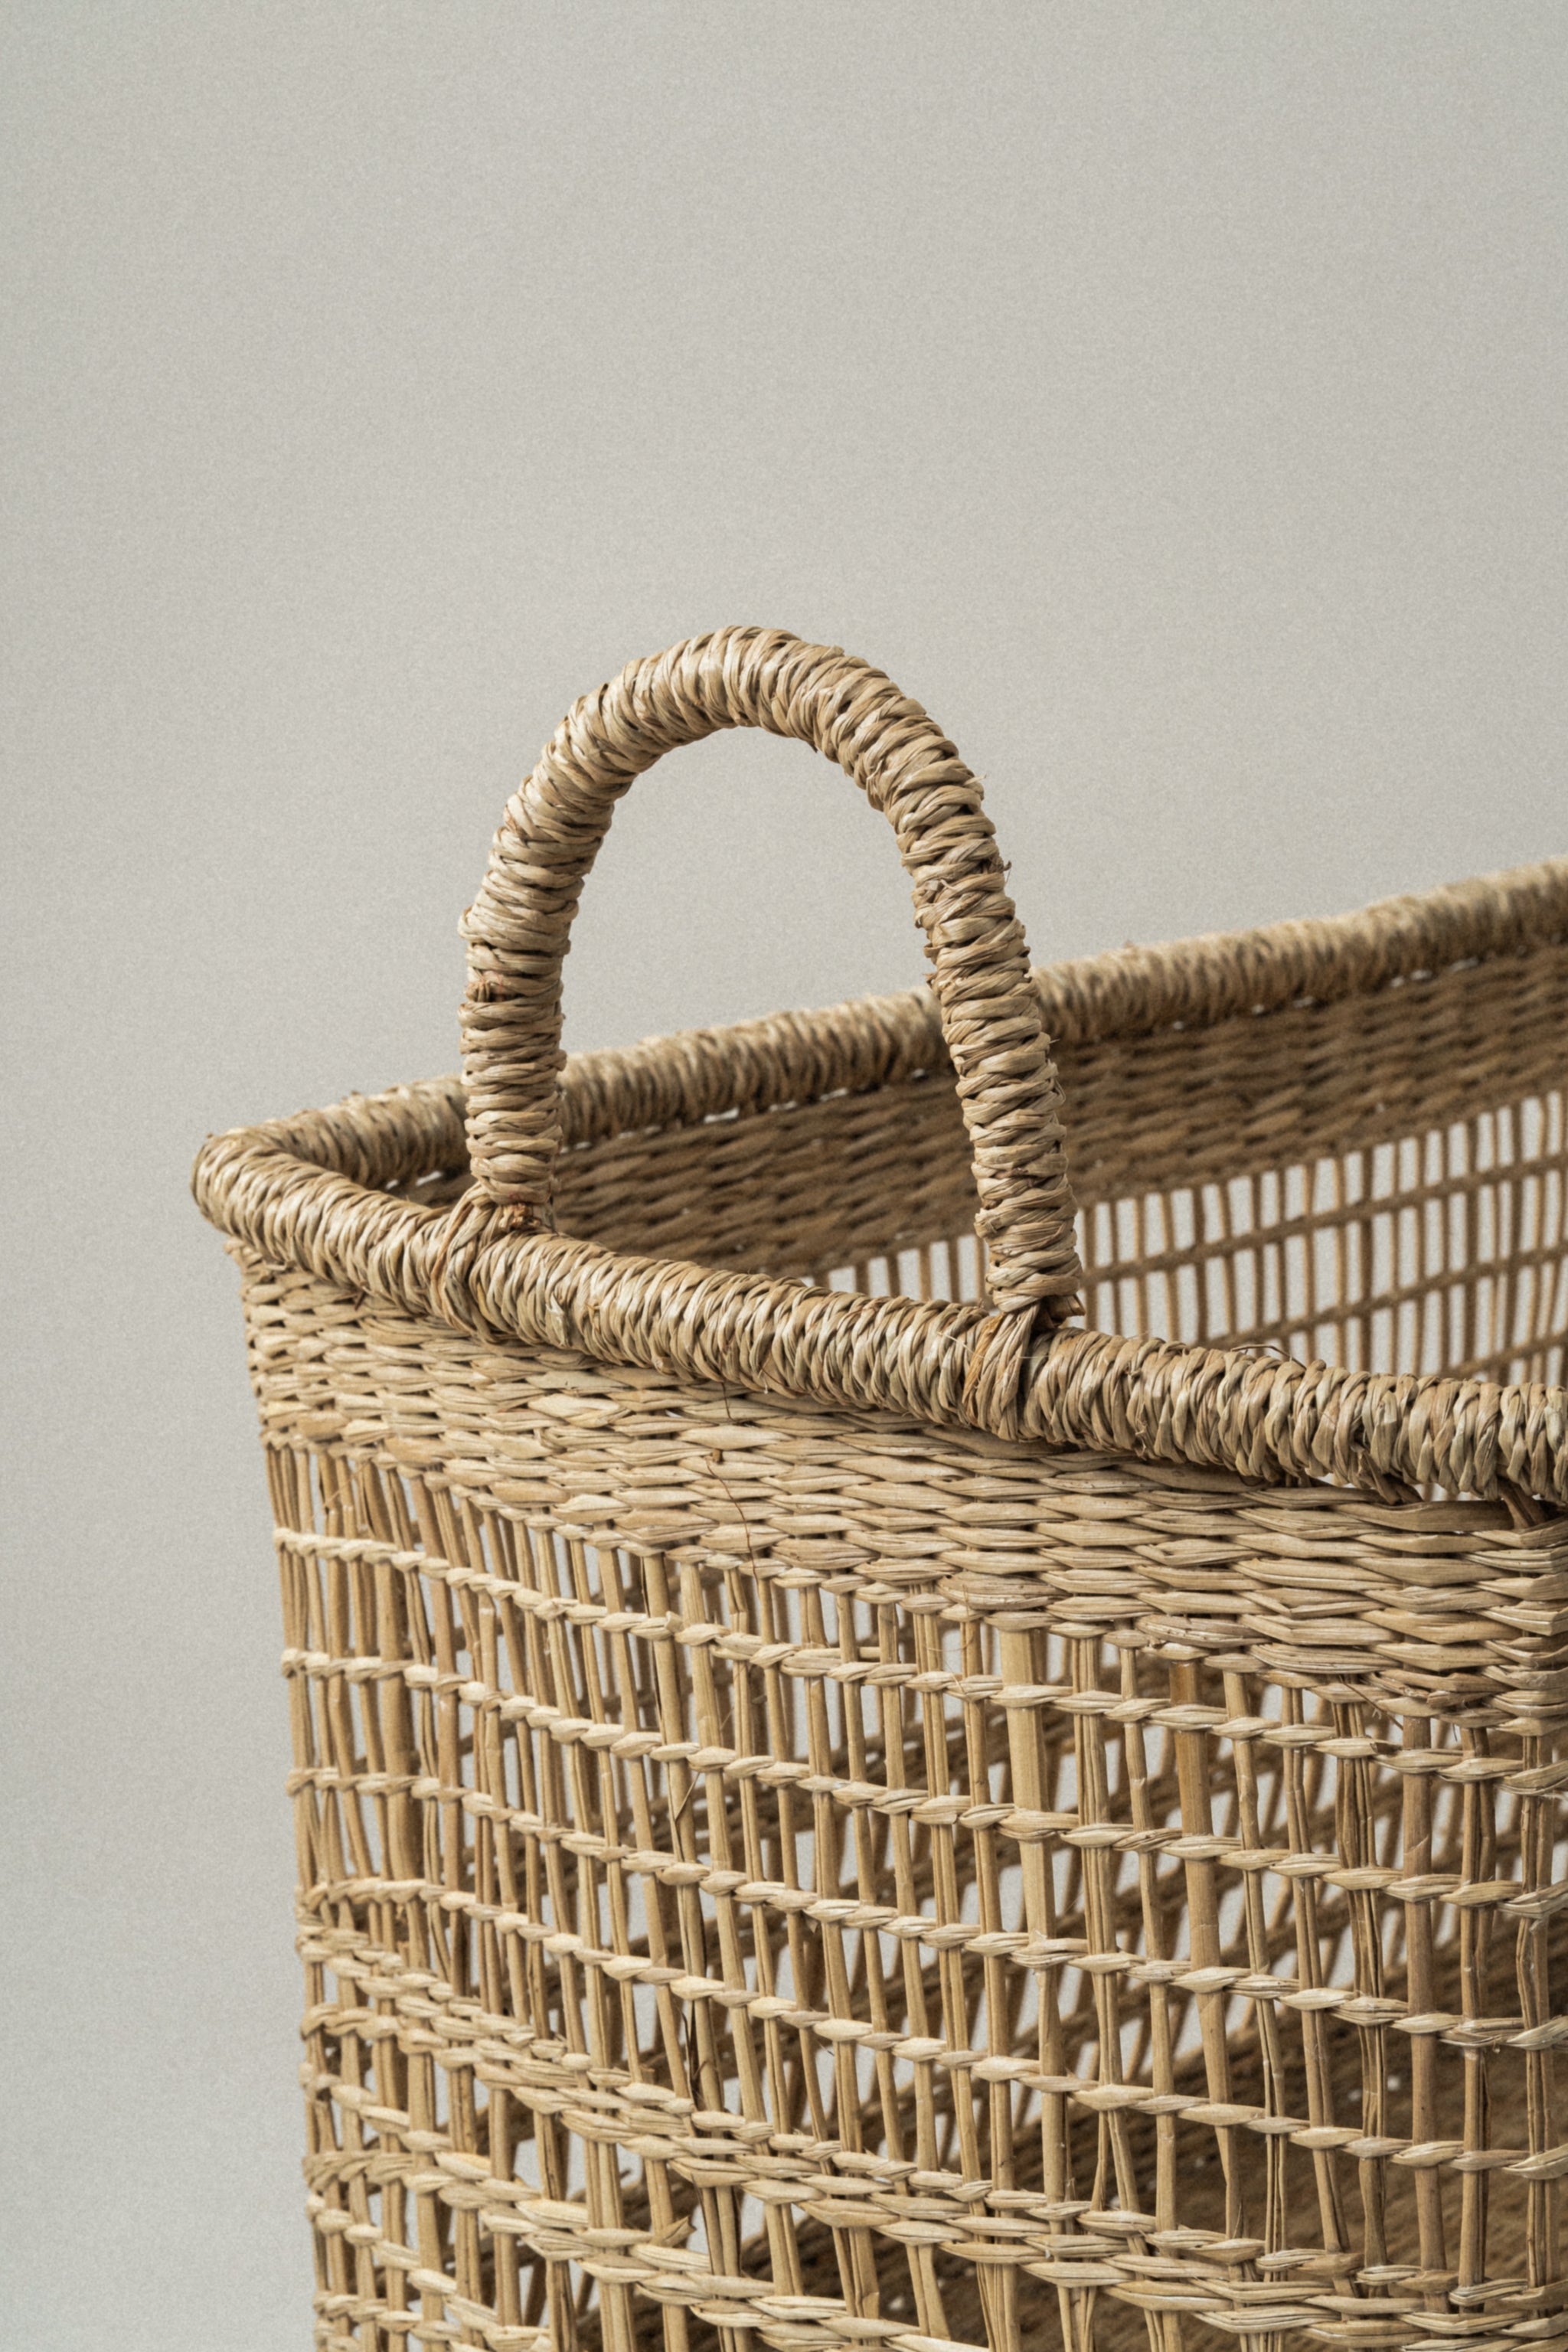 Small Salema Rectangular Seagrass Basket with Handles - Small Salema Rectangular Seagrass Basket with Handles